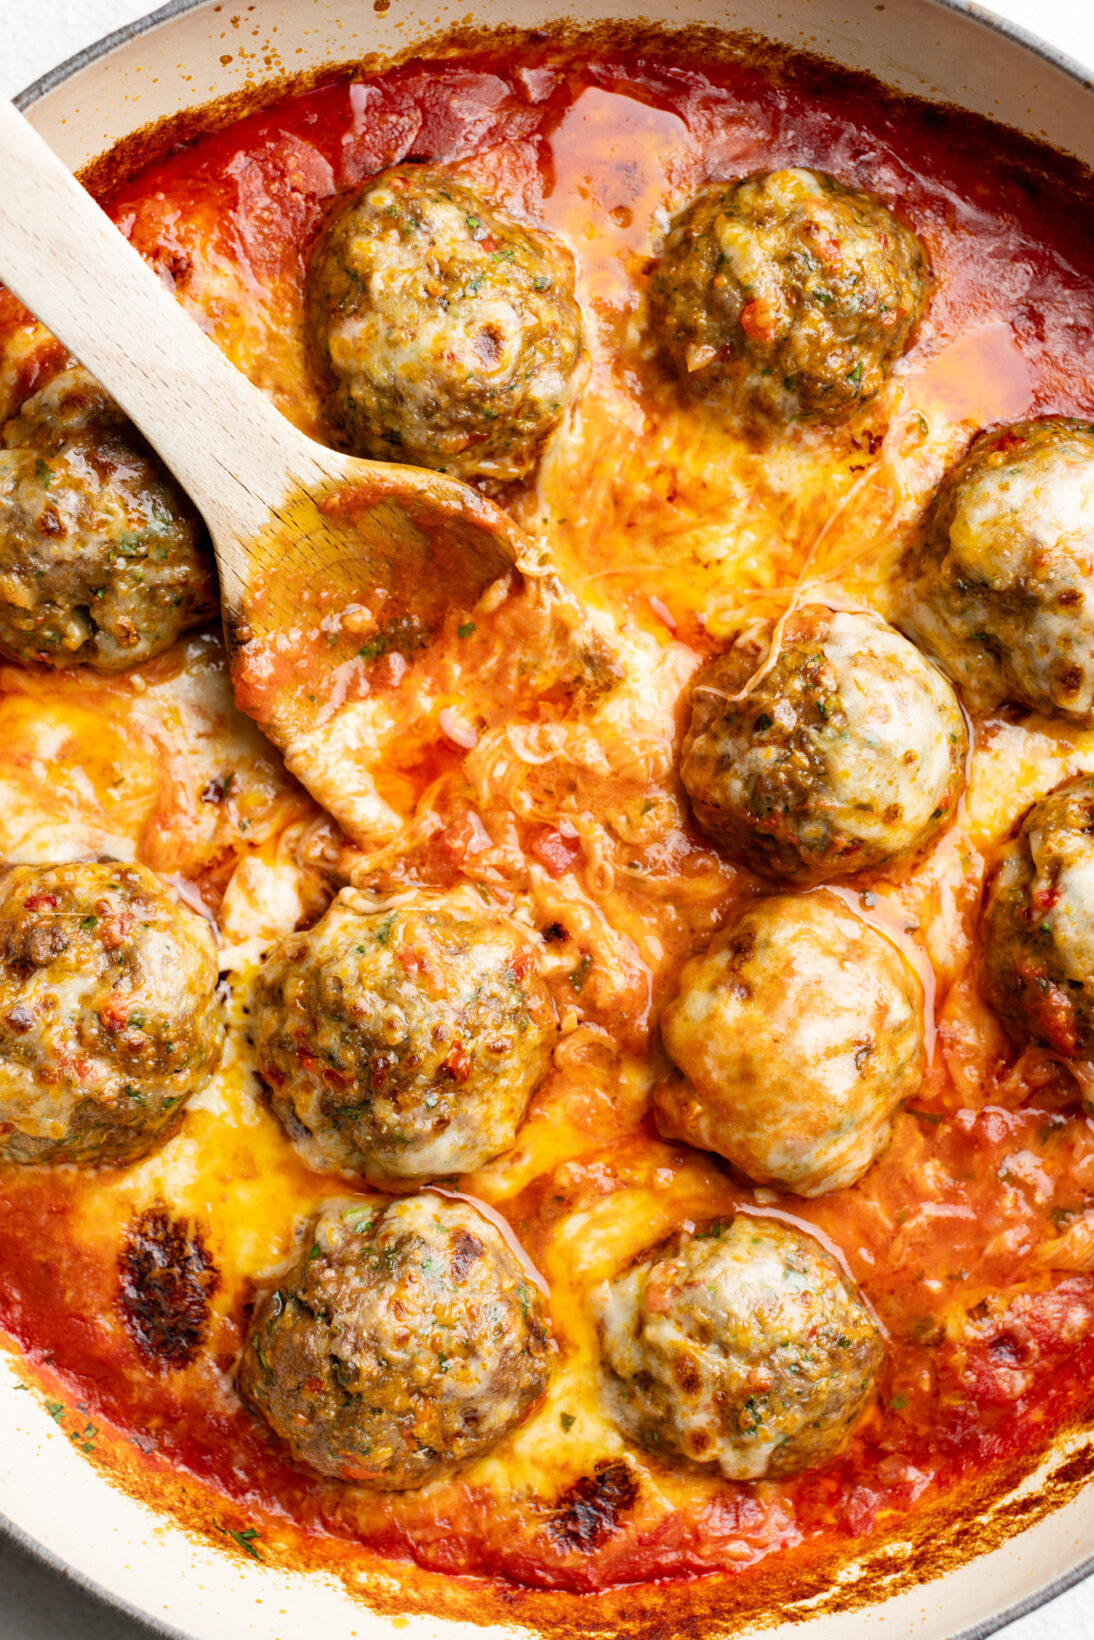 Calabrian spicy meatballs after being baked toped with cheese